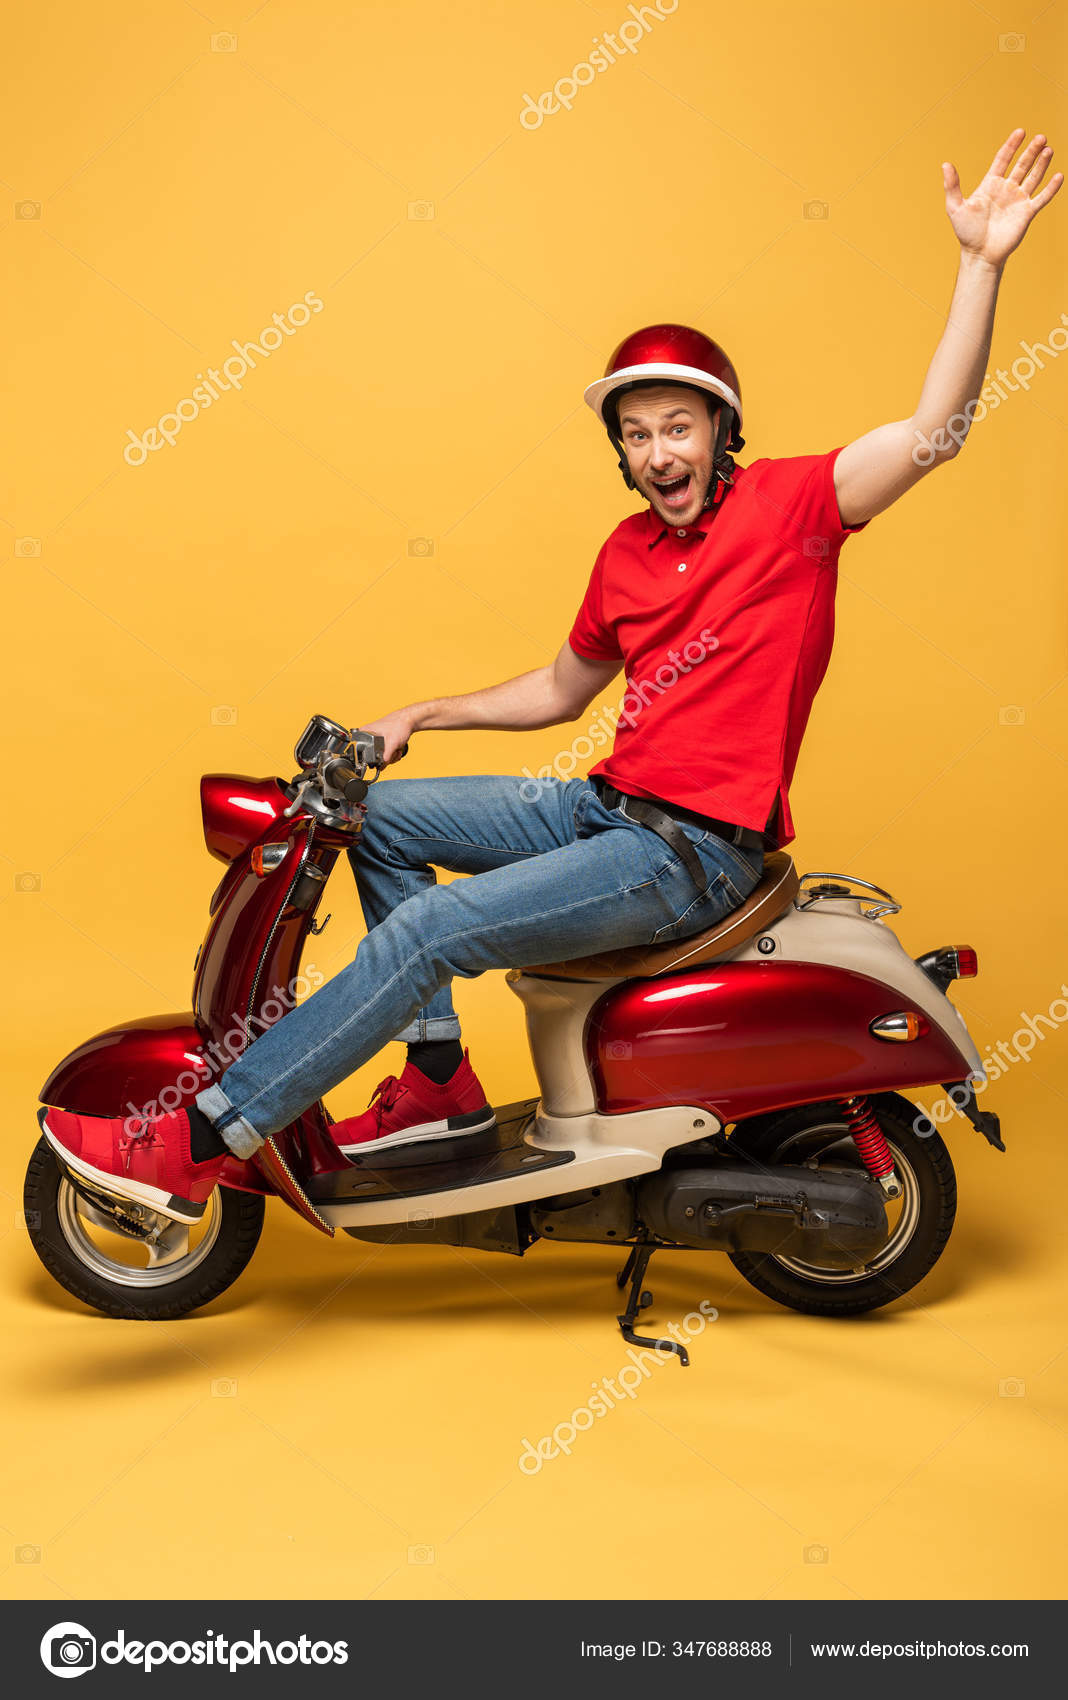 diamant Lyn undulate Side View Delivery Man Scooter Waving Hand Yellow Background Stock Photo by  ©HayDmitriy 347688888